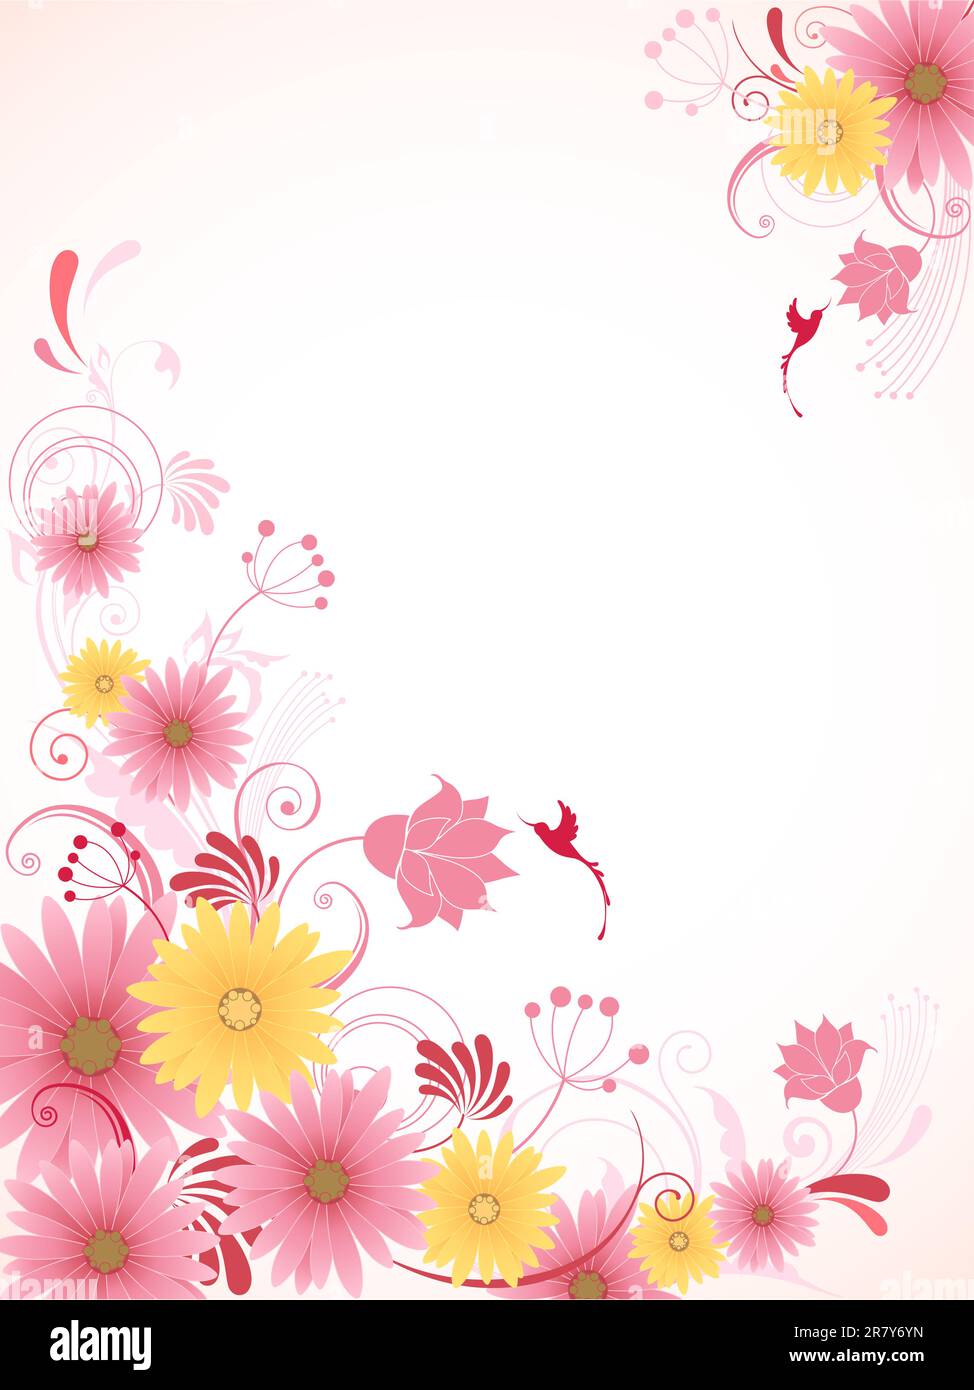 vector floral background with pink flowers Stock Vector